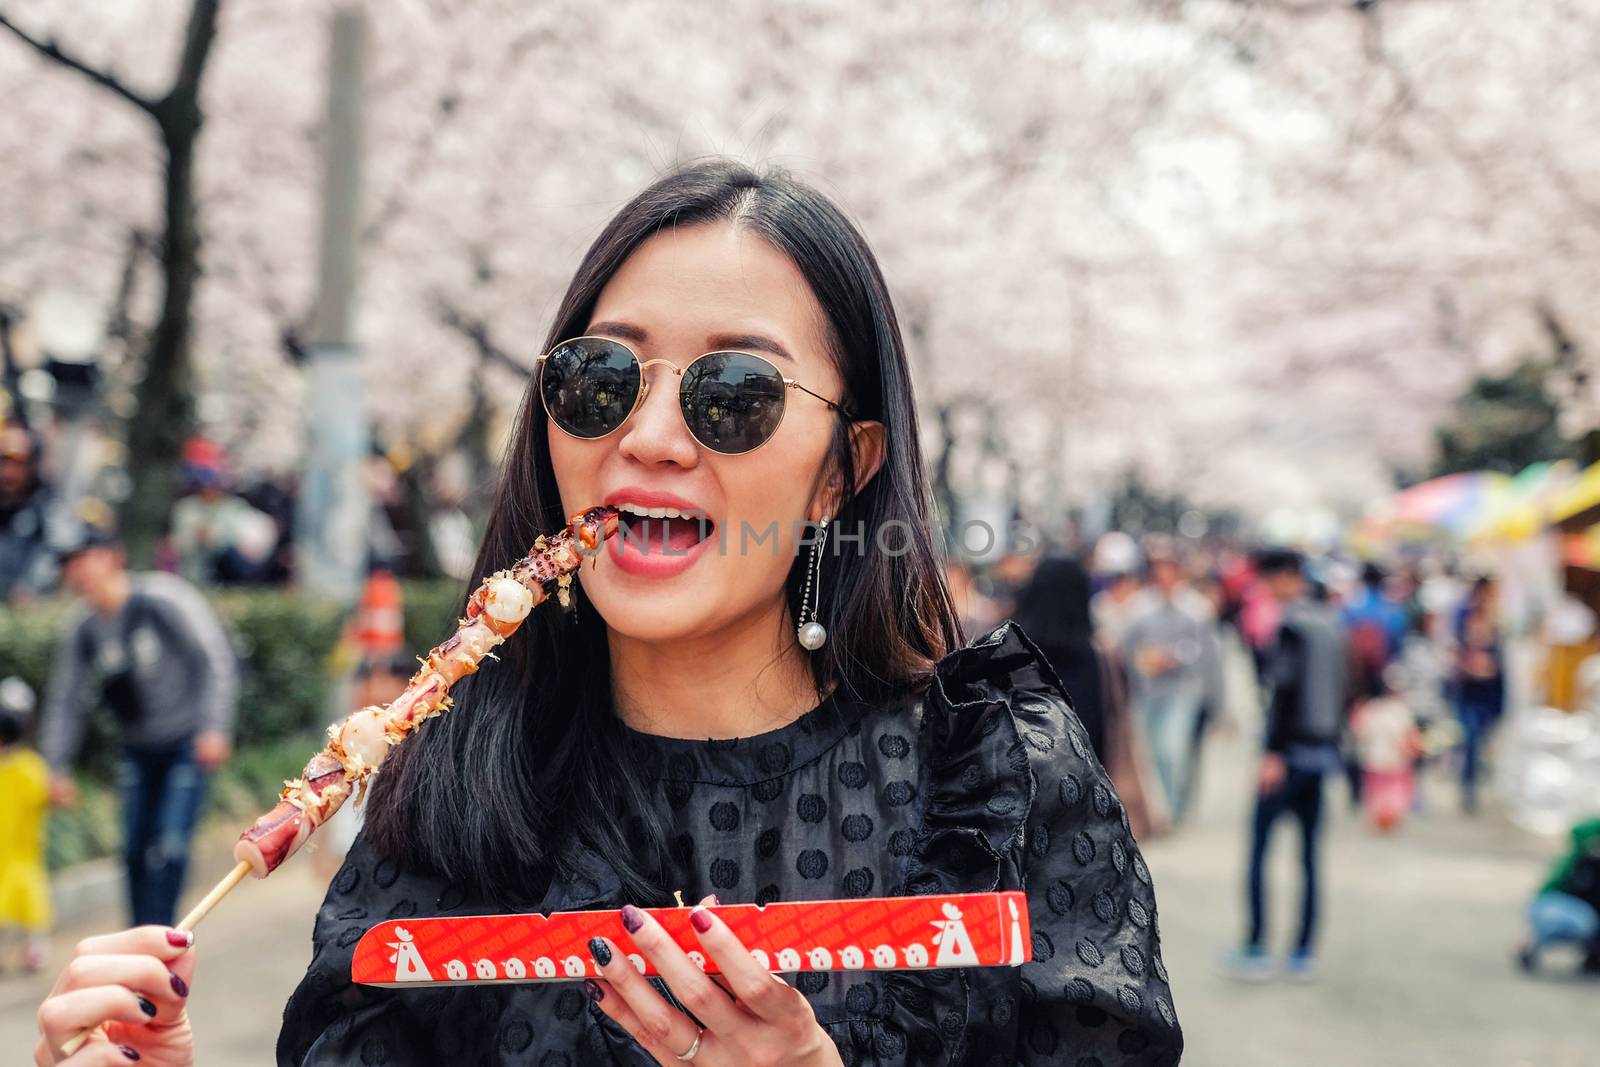 Young woman eating Steamed Octopus Legs at Jinhae Gunhangje Festival street food in Seoul, South Korea